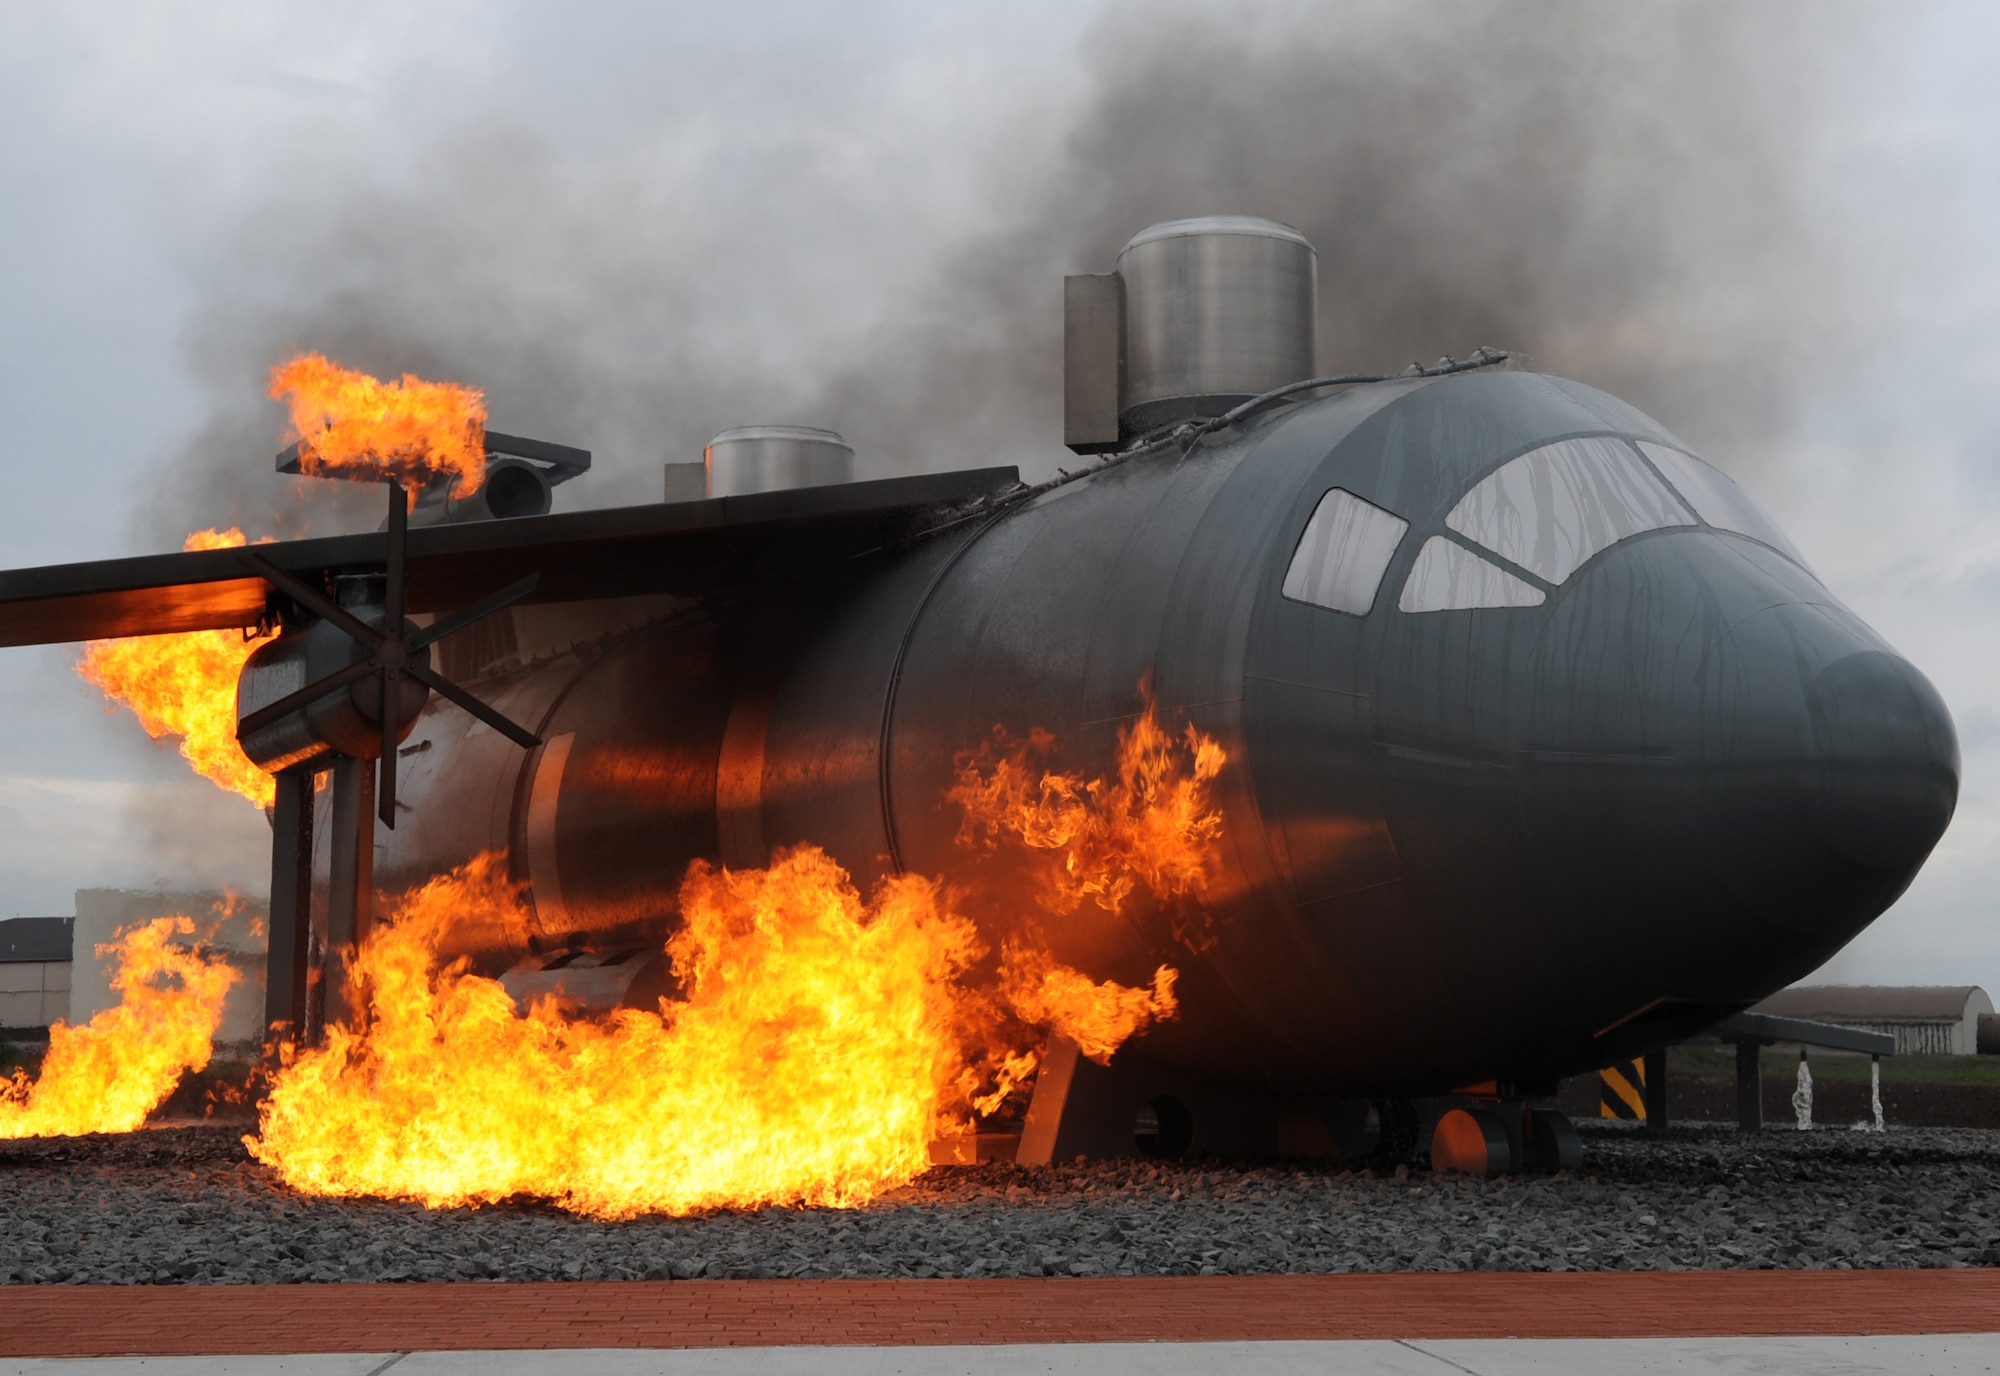 A new aircraft fire training burn site is engulfed in flames for construction team members and fire trainers to view, Ramstein Air Base, Germany, Sept. 9, 2010. The new burn site is the only aircraft training site in Germany and will help train in many aircraft scenarios. (U.S. Air Force photo by Senior Airman Caleb Pierce)